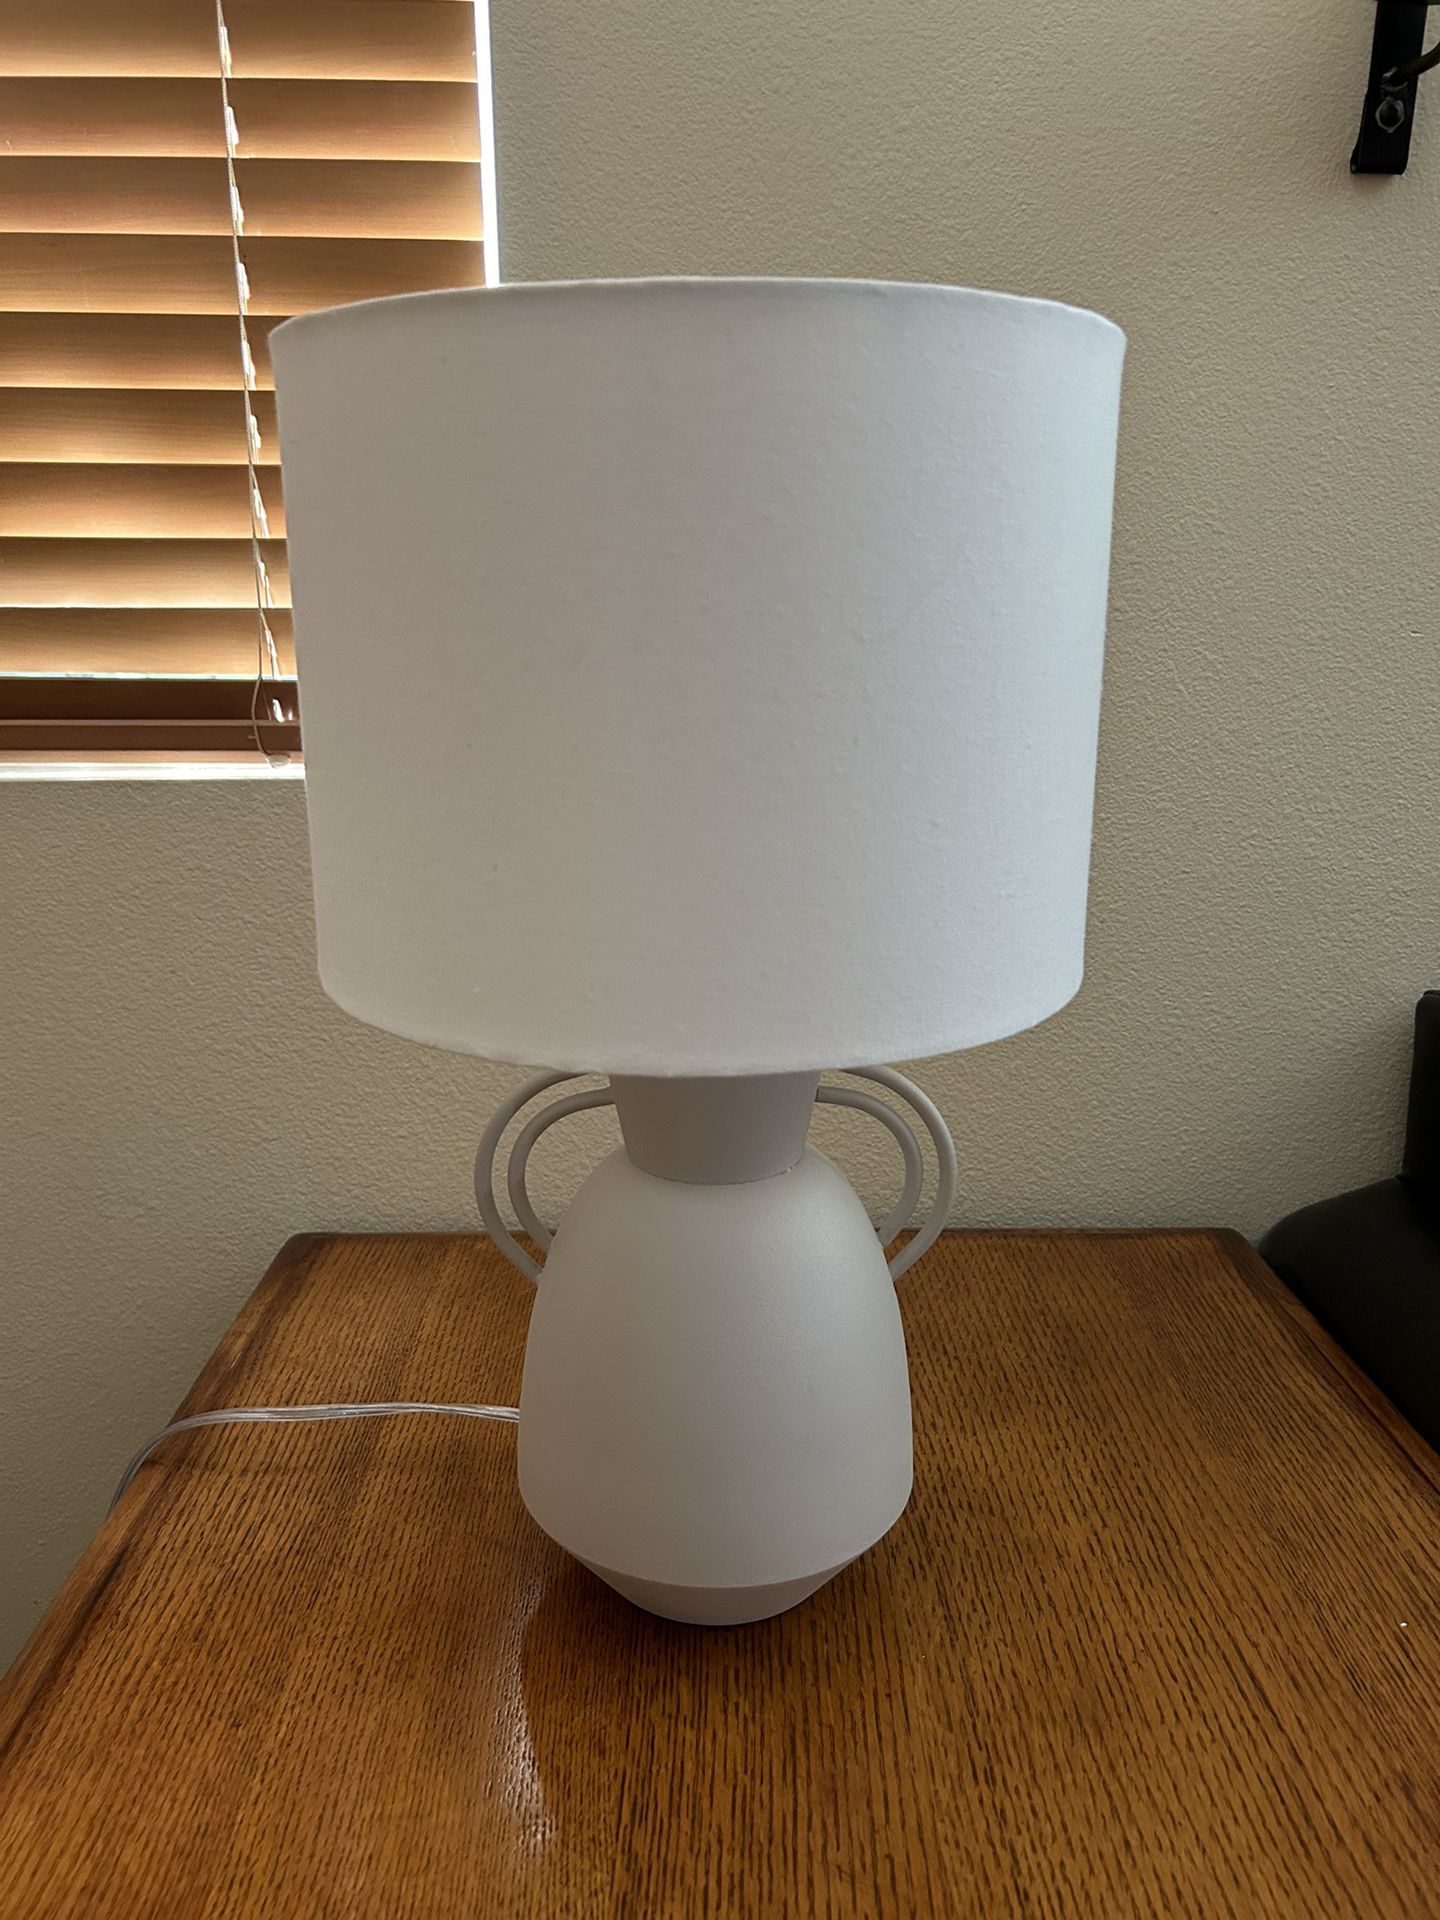 New Lamp !!  2 Available 